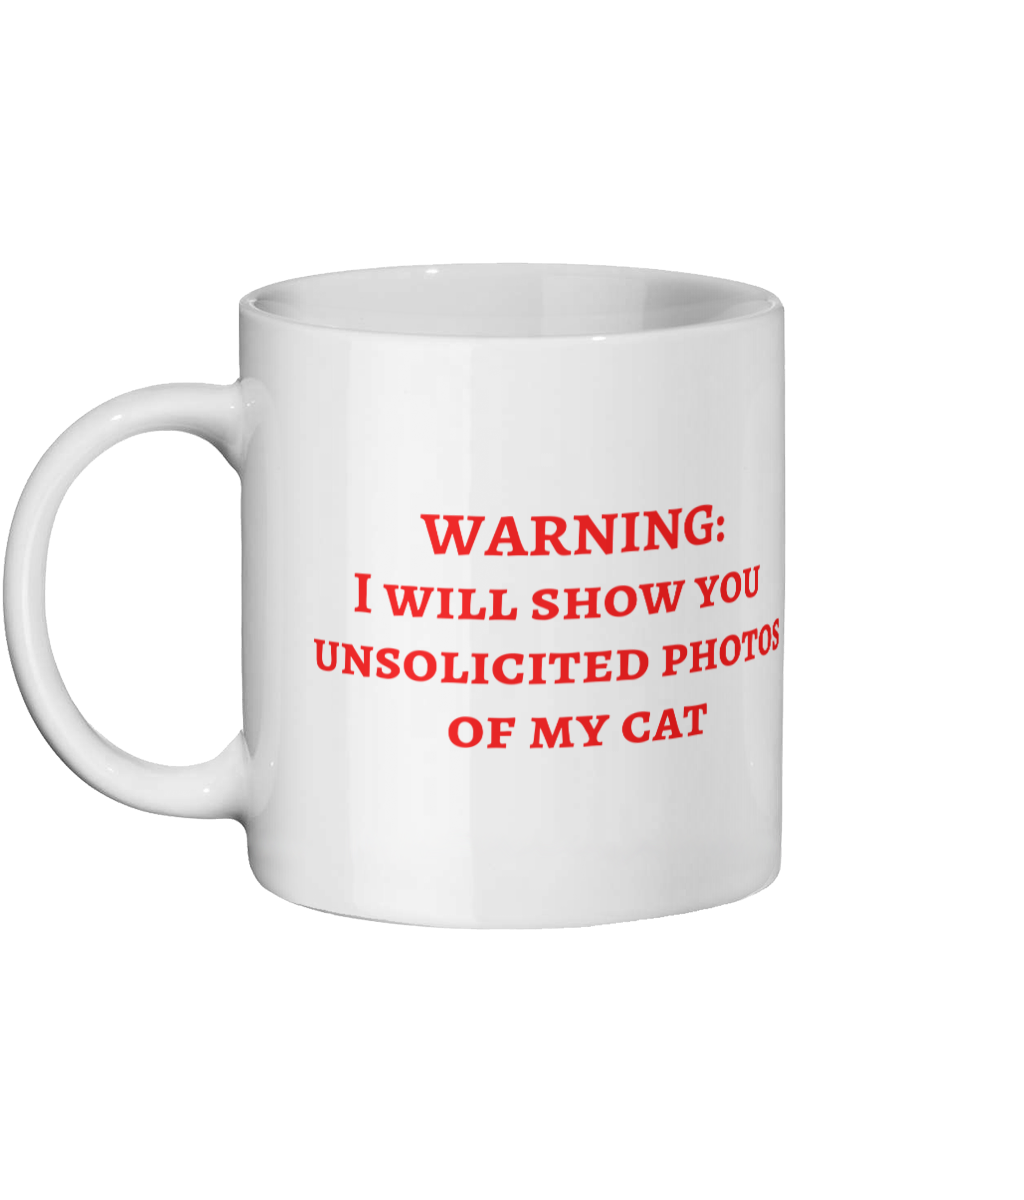 WARNING: I will show you unsolicited photos of my cat - Ceramic Mug